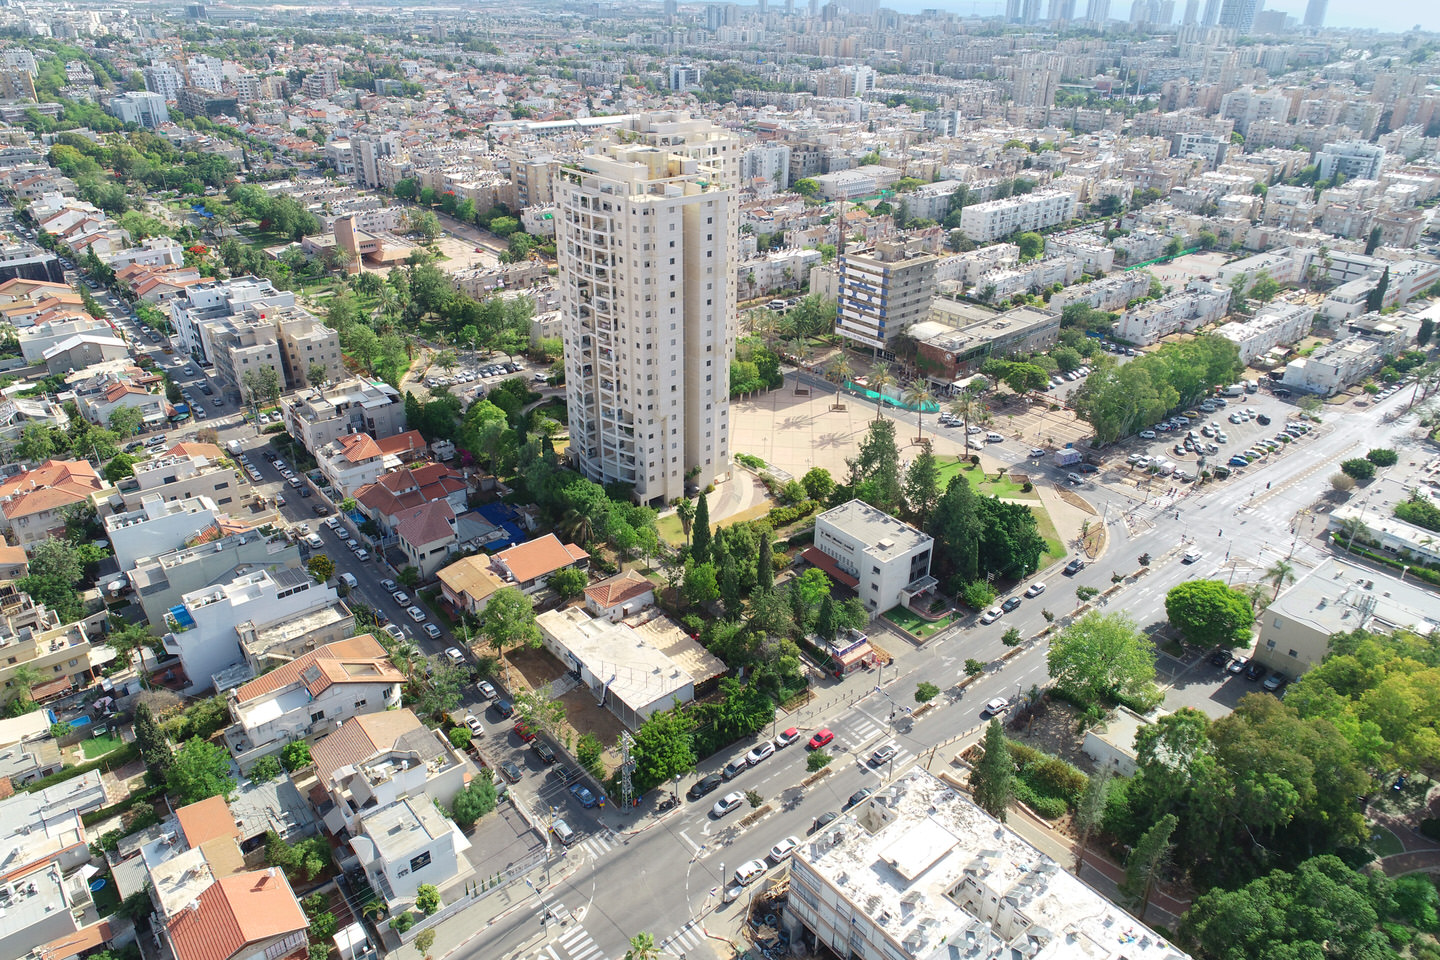 Arlozorov: A value-add development in the heart of Holon, at the intersection of Arlozorov and HaHistadrut Streets | Reality the Leading Group of Real Estate Investment Funds in Israel